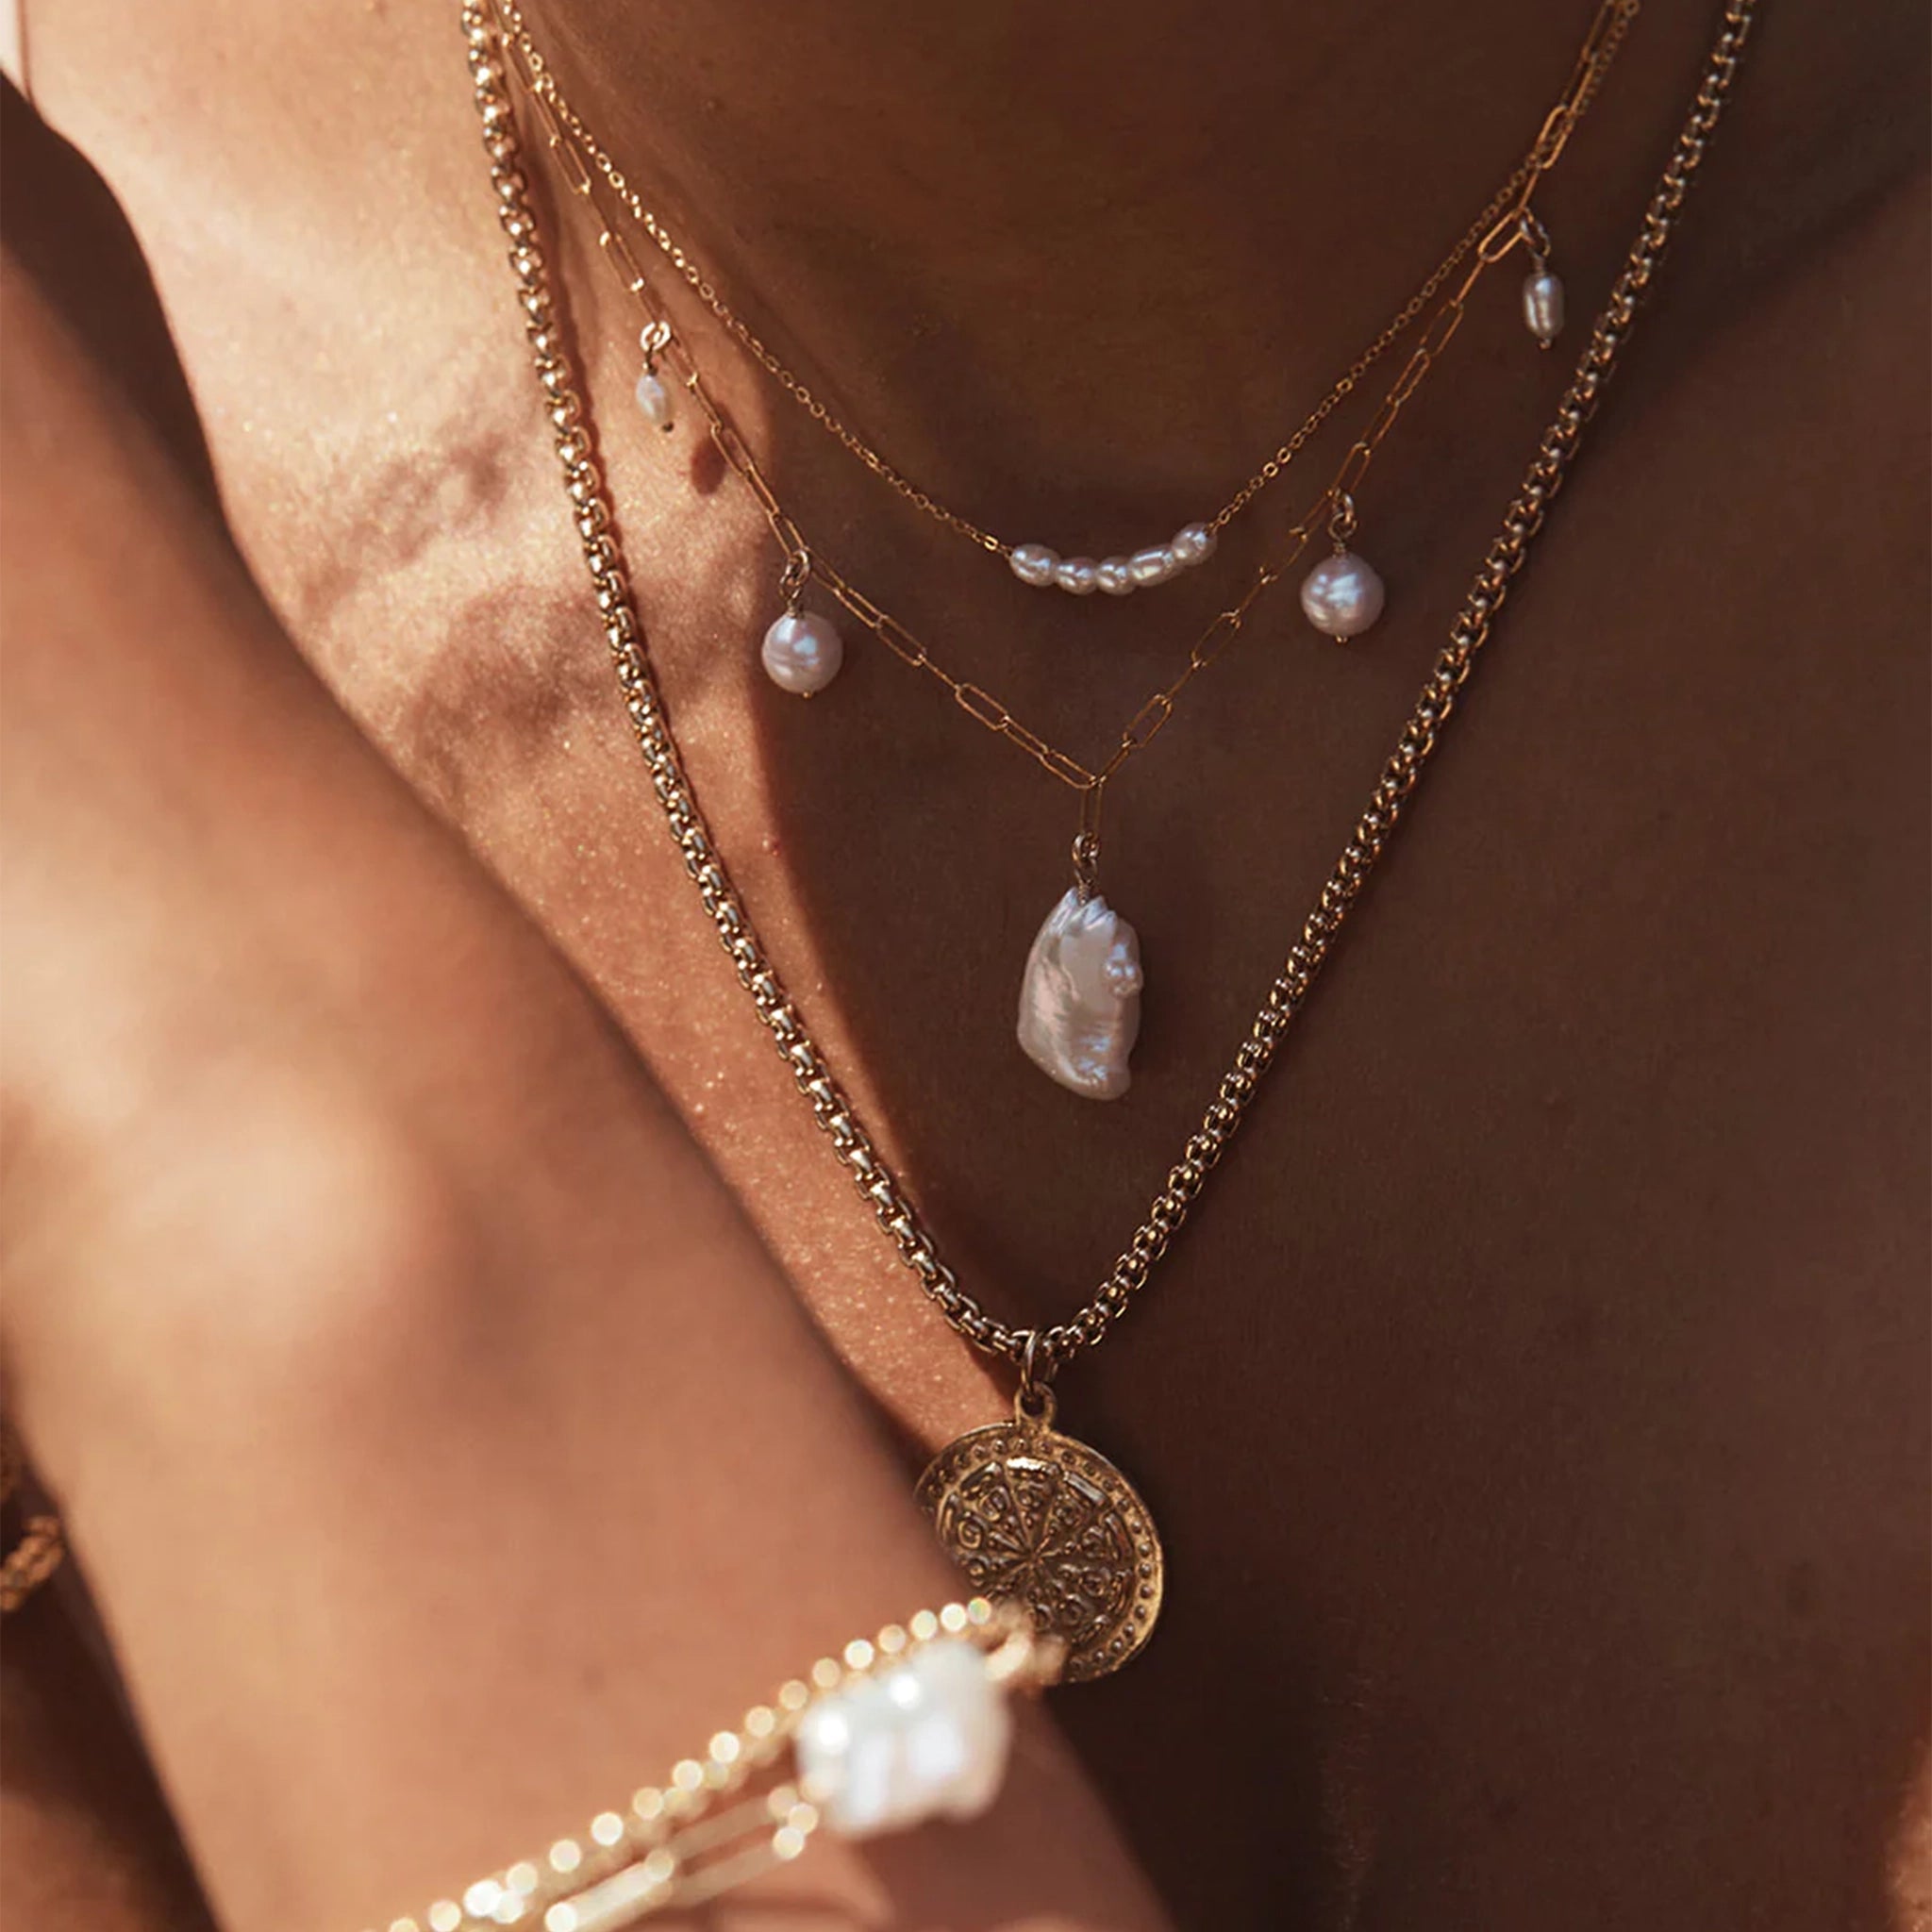 The dainty gold chain necklace with five small pearls lined next to each other. 